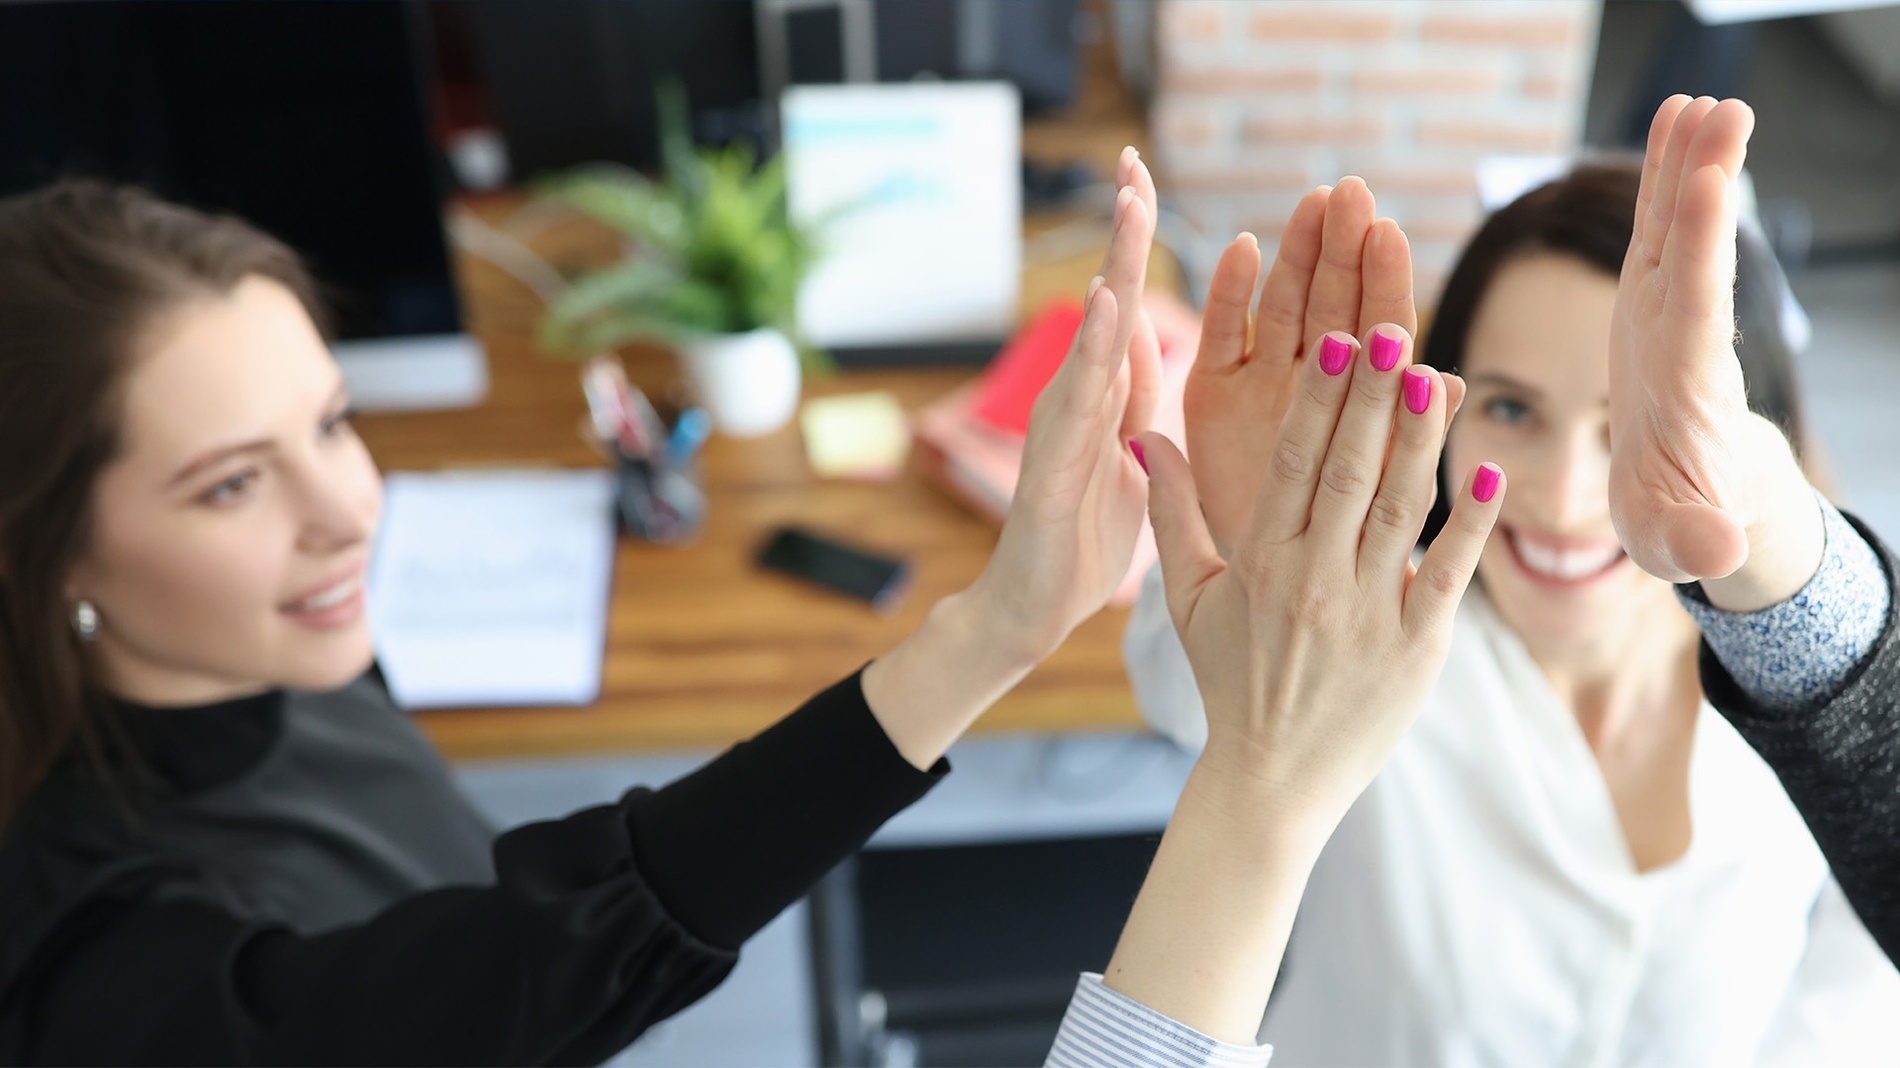 three women with pink nails give each other a high five